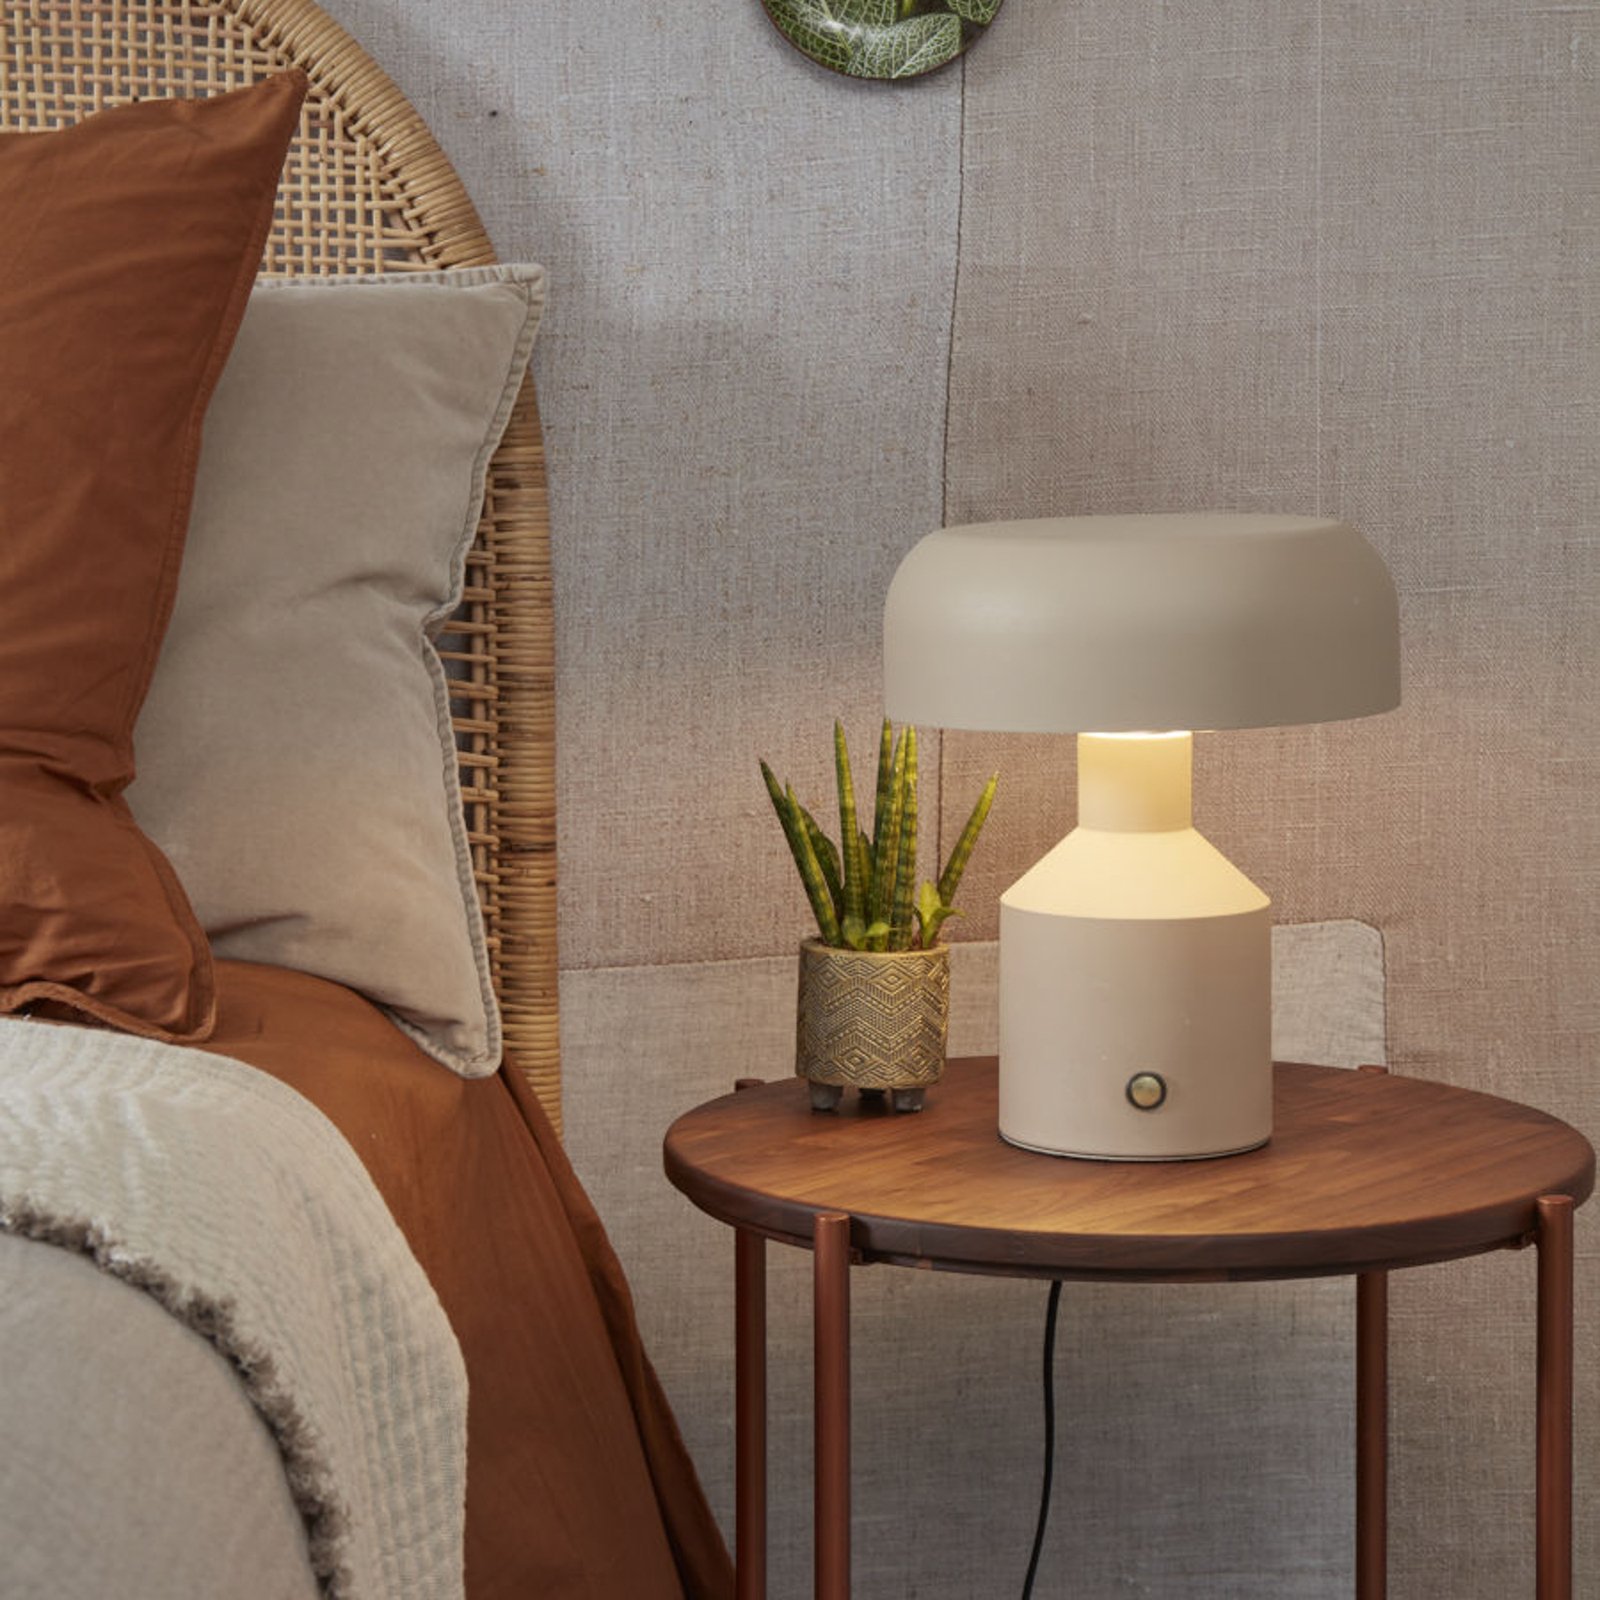 It's about RoMi Porto table lamp, sand coloured